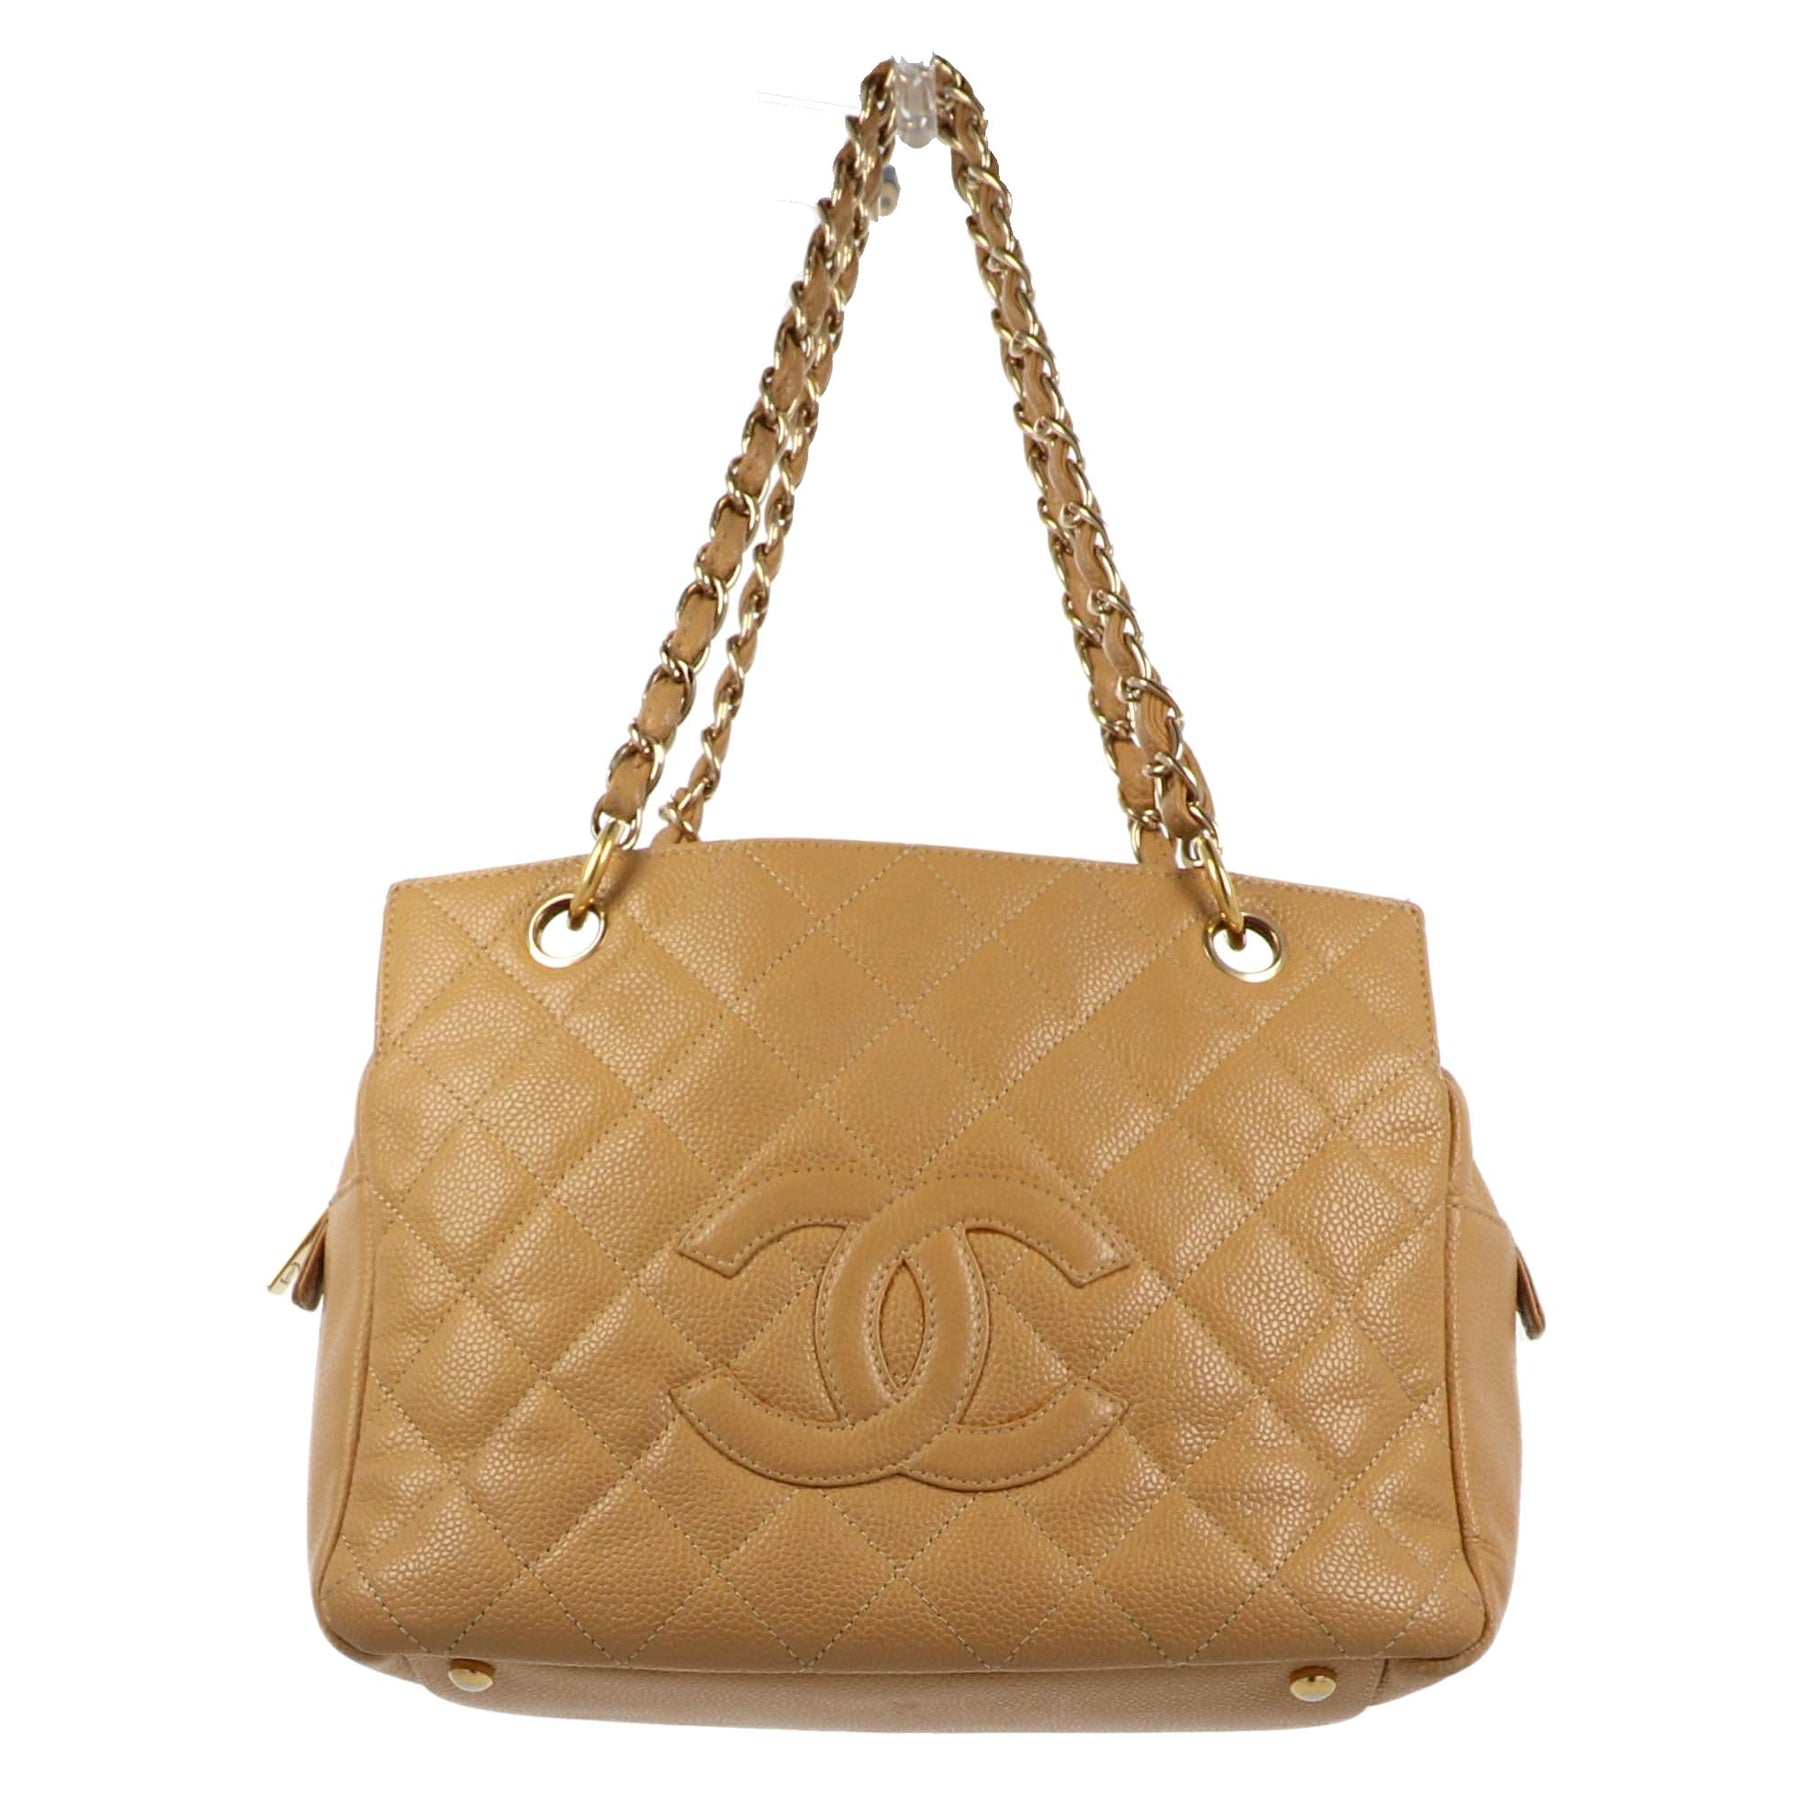 Chanel Petite Shopping Tote Shoulder Bag in Beige Leather – Fancy Lux